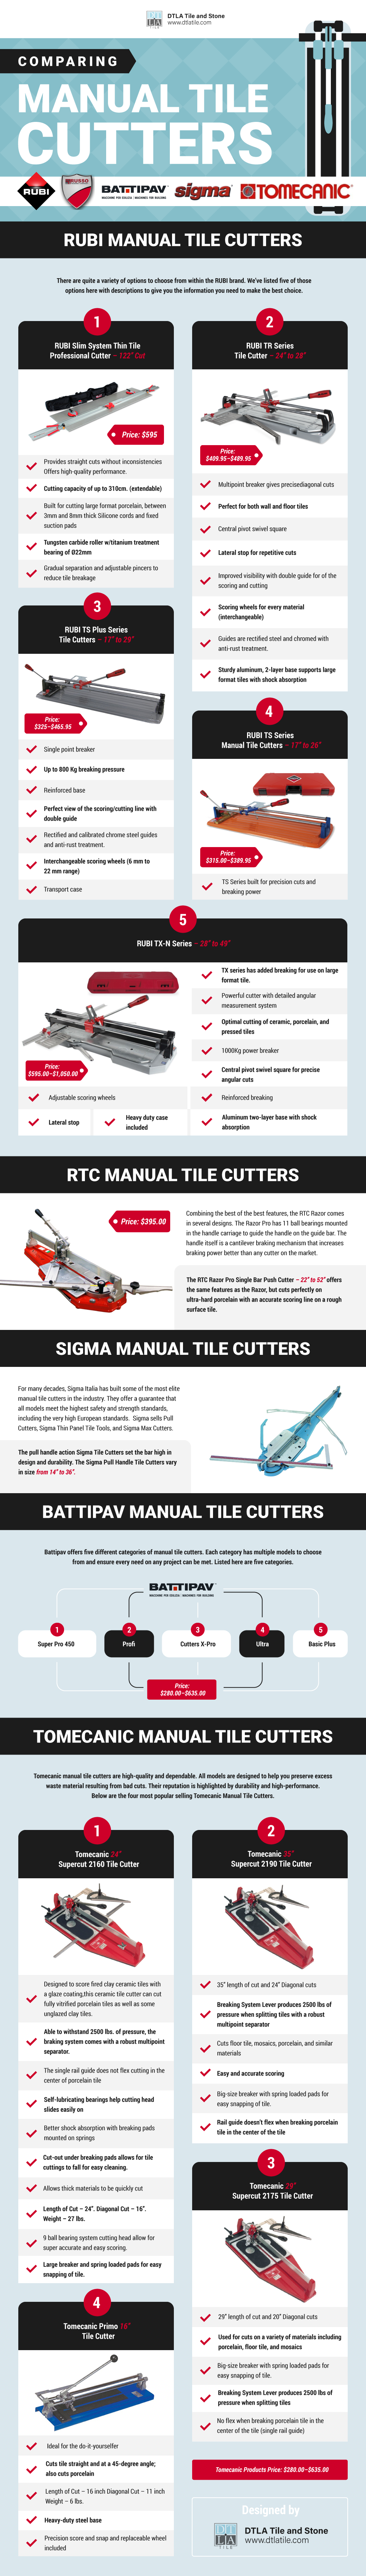 Comparing Manual Tile Cutters; Five That Make The Cut